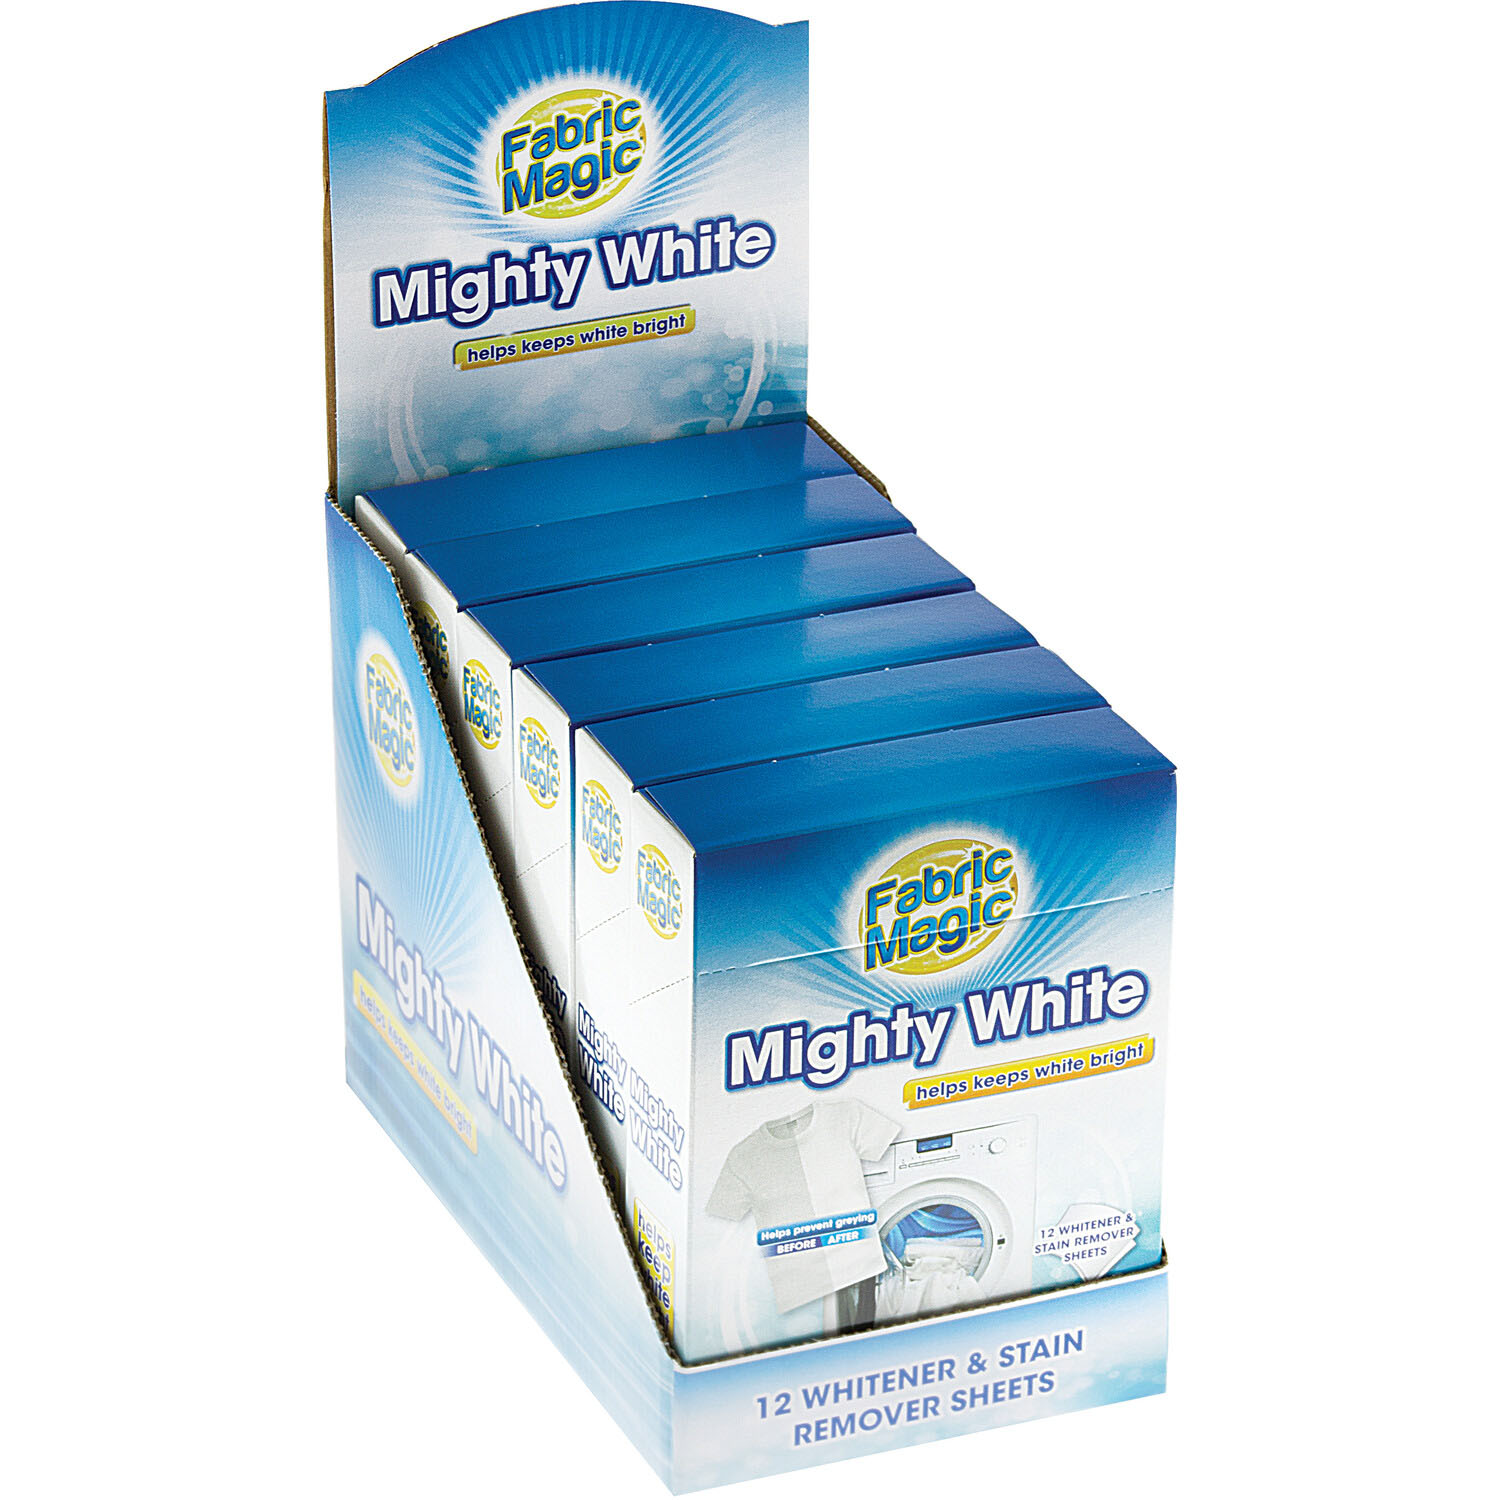 Mighty White Sheets Image